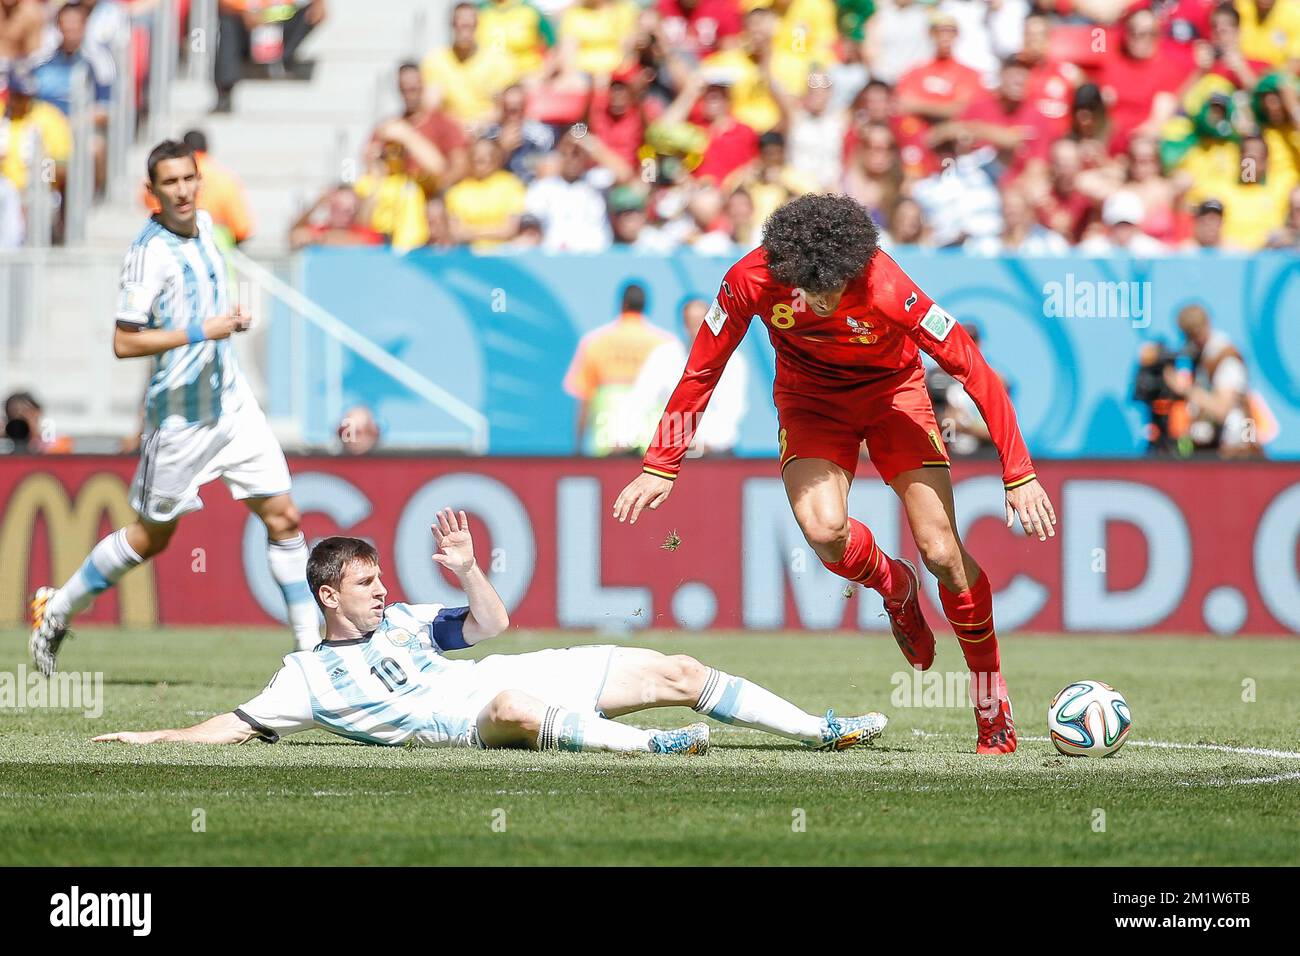 Argentina's Lionel Messi and Belgium's Marouane Fellaini fight for the ball during the quarter final match between Belgian national soccer team Red Devils and Argentina, in Estadio Nacional Mane Garrincha, in Brasilia, Brazil, during the 2014 FIFA World Cup, Saturday 05 July 2014. BELGA PHOTO BRUNO FAHY Stock Photo